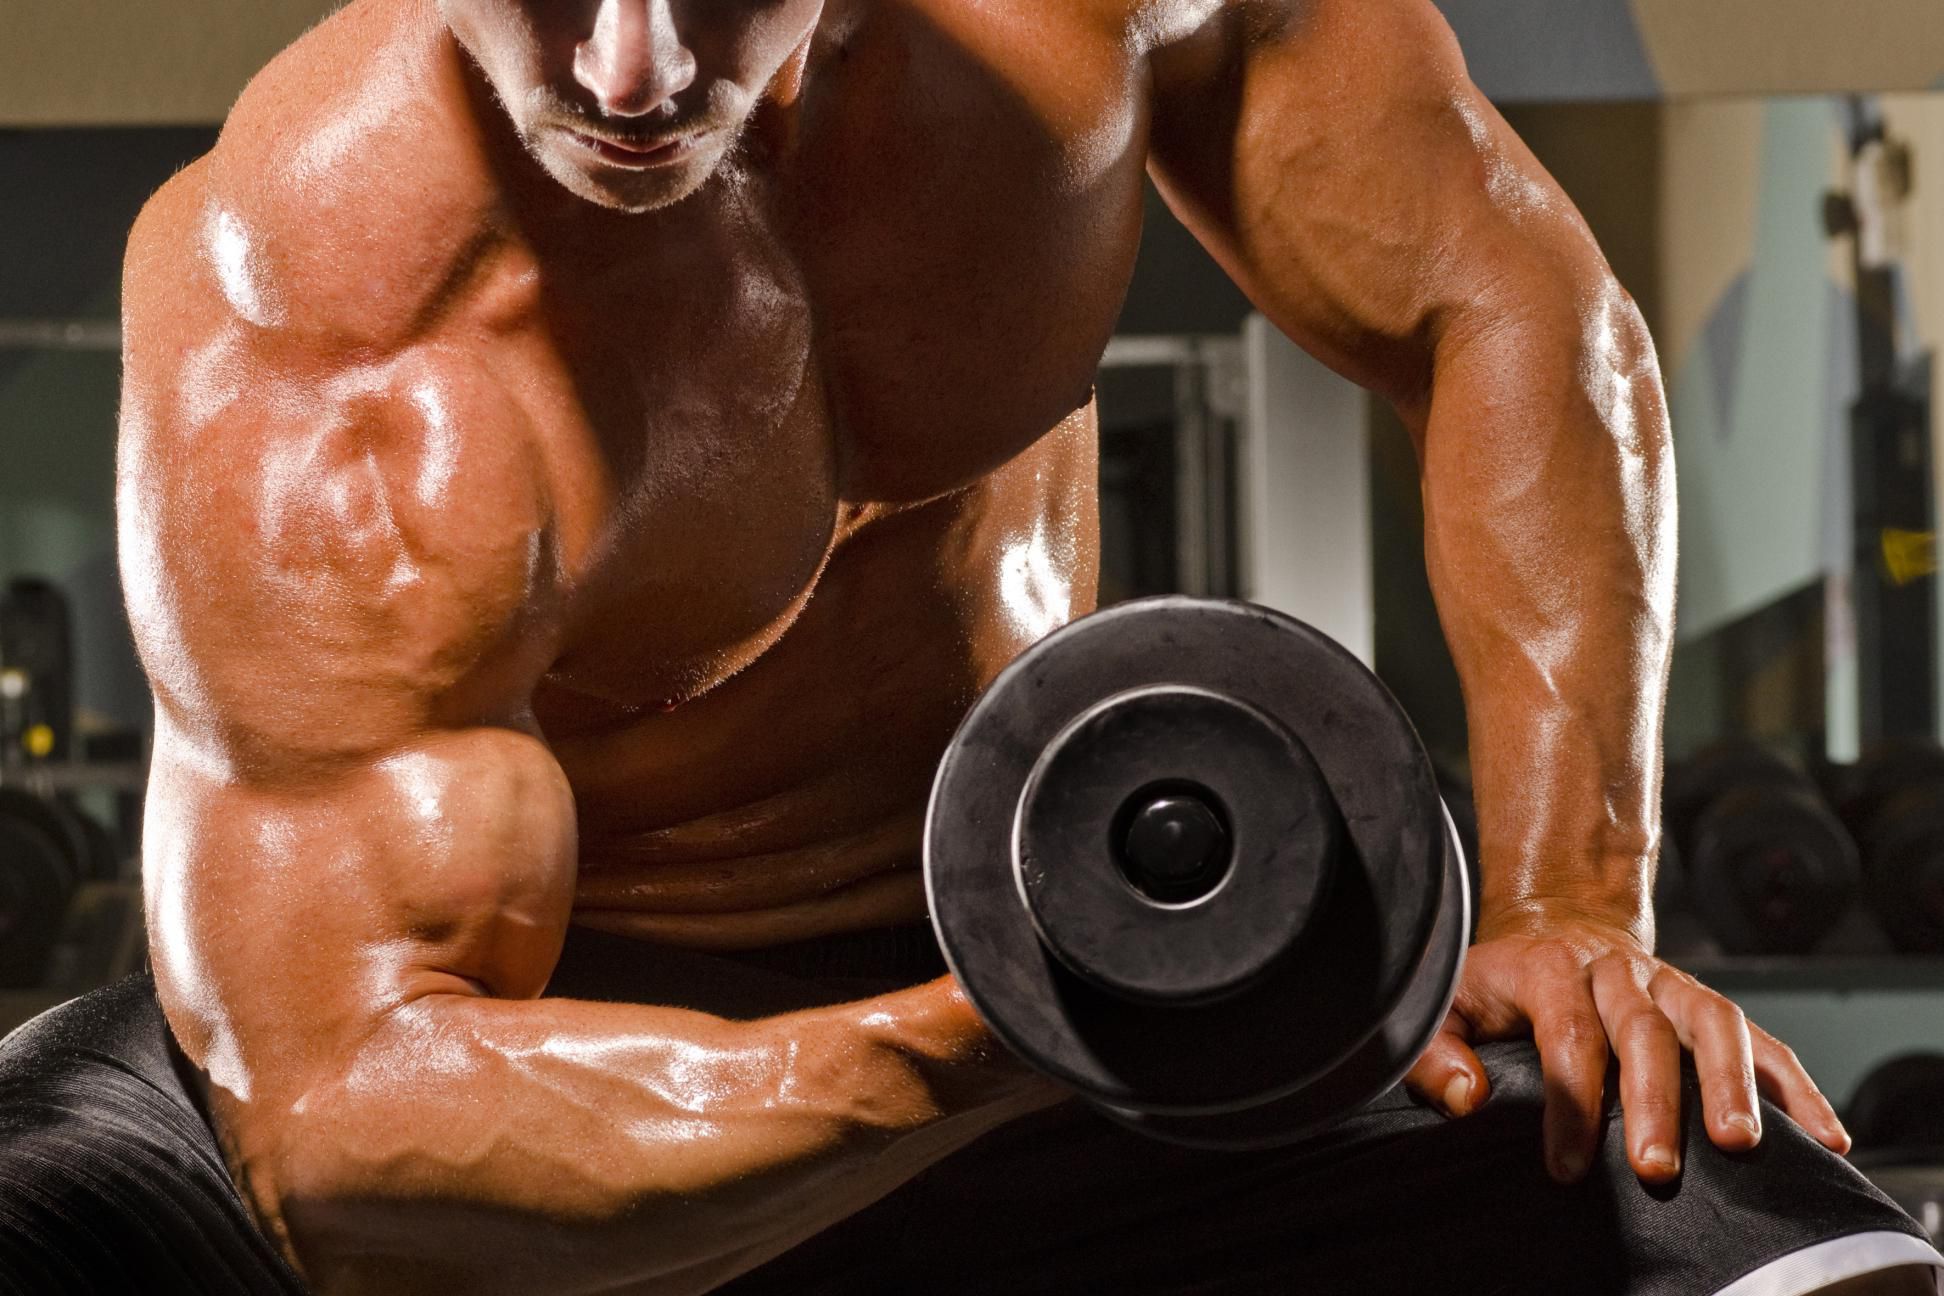 Protein for Bodybuilding: How Much Is Too Much?